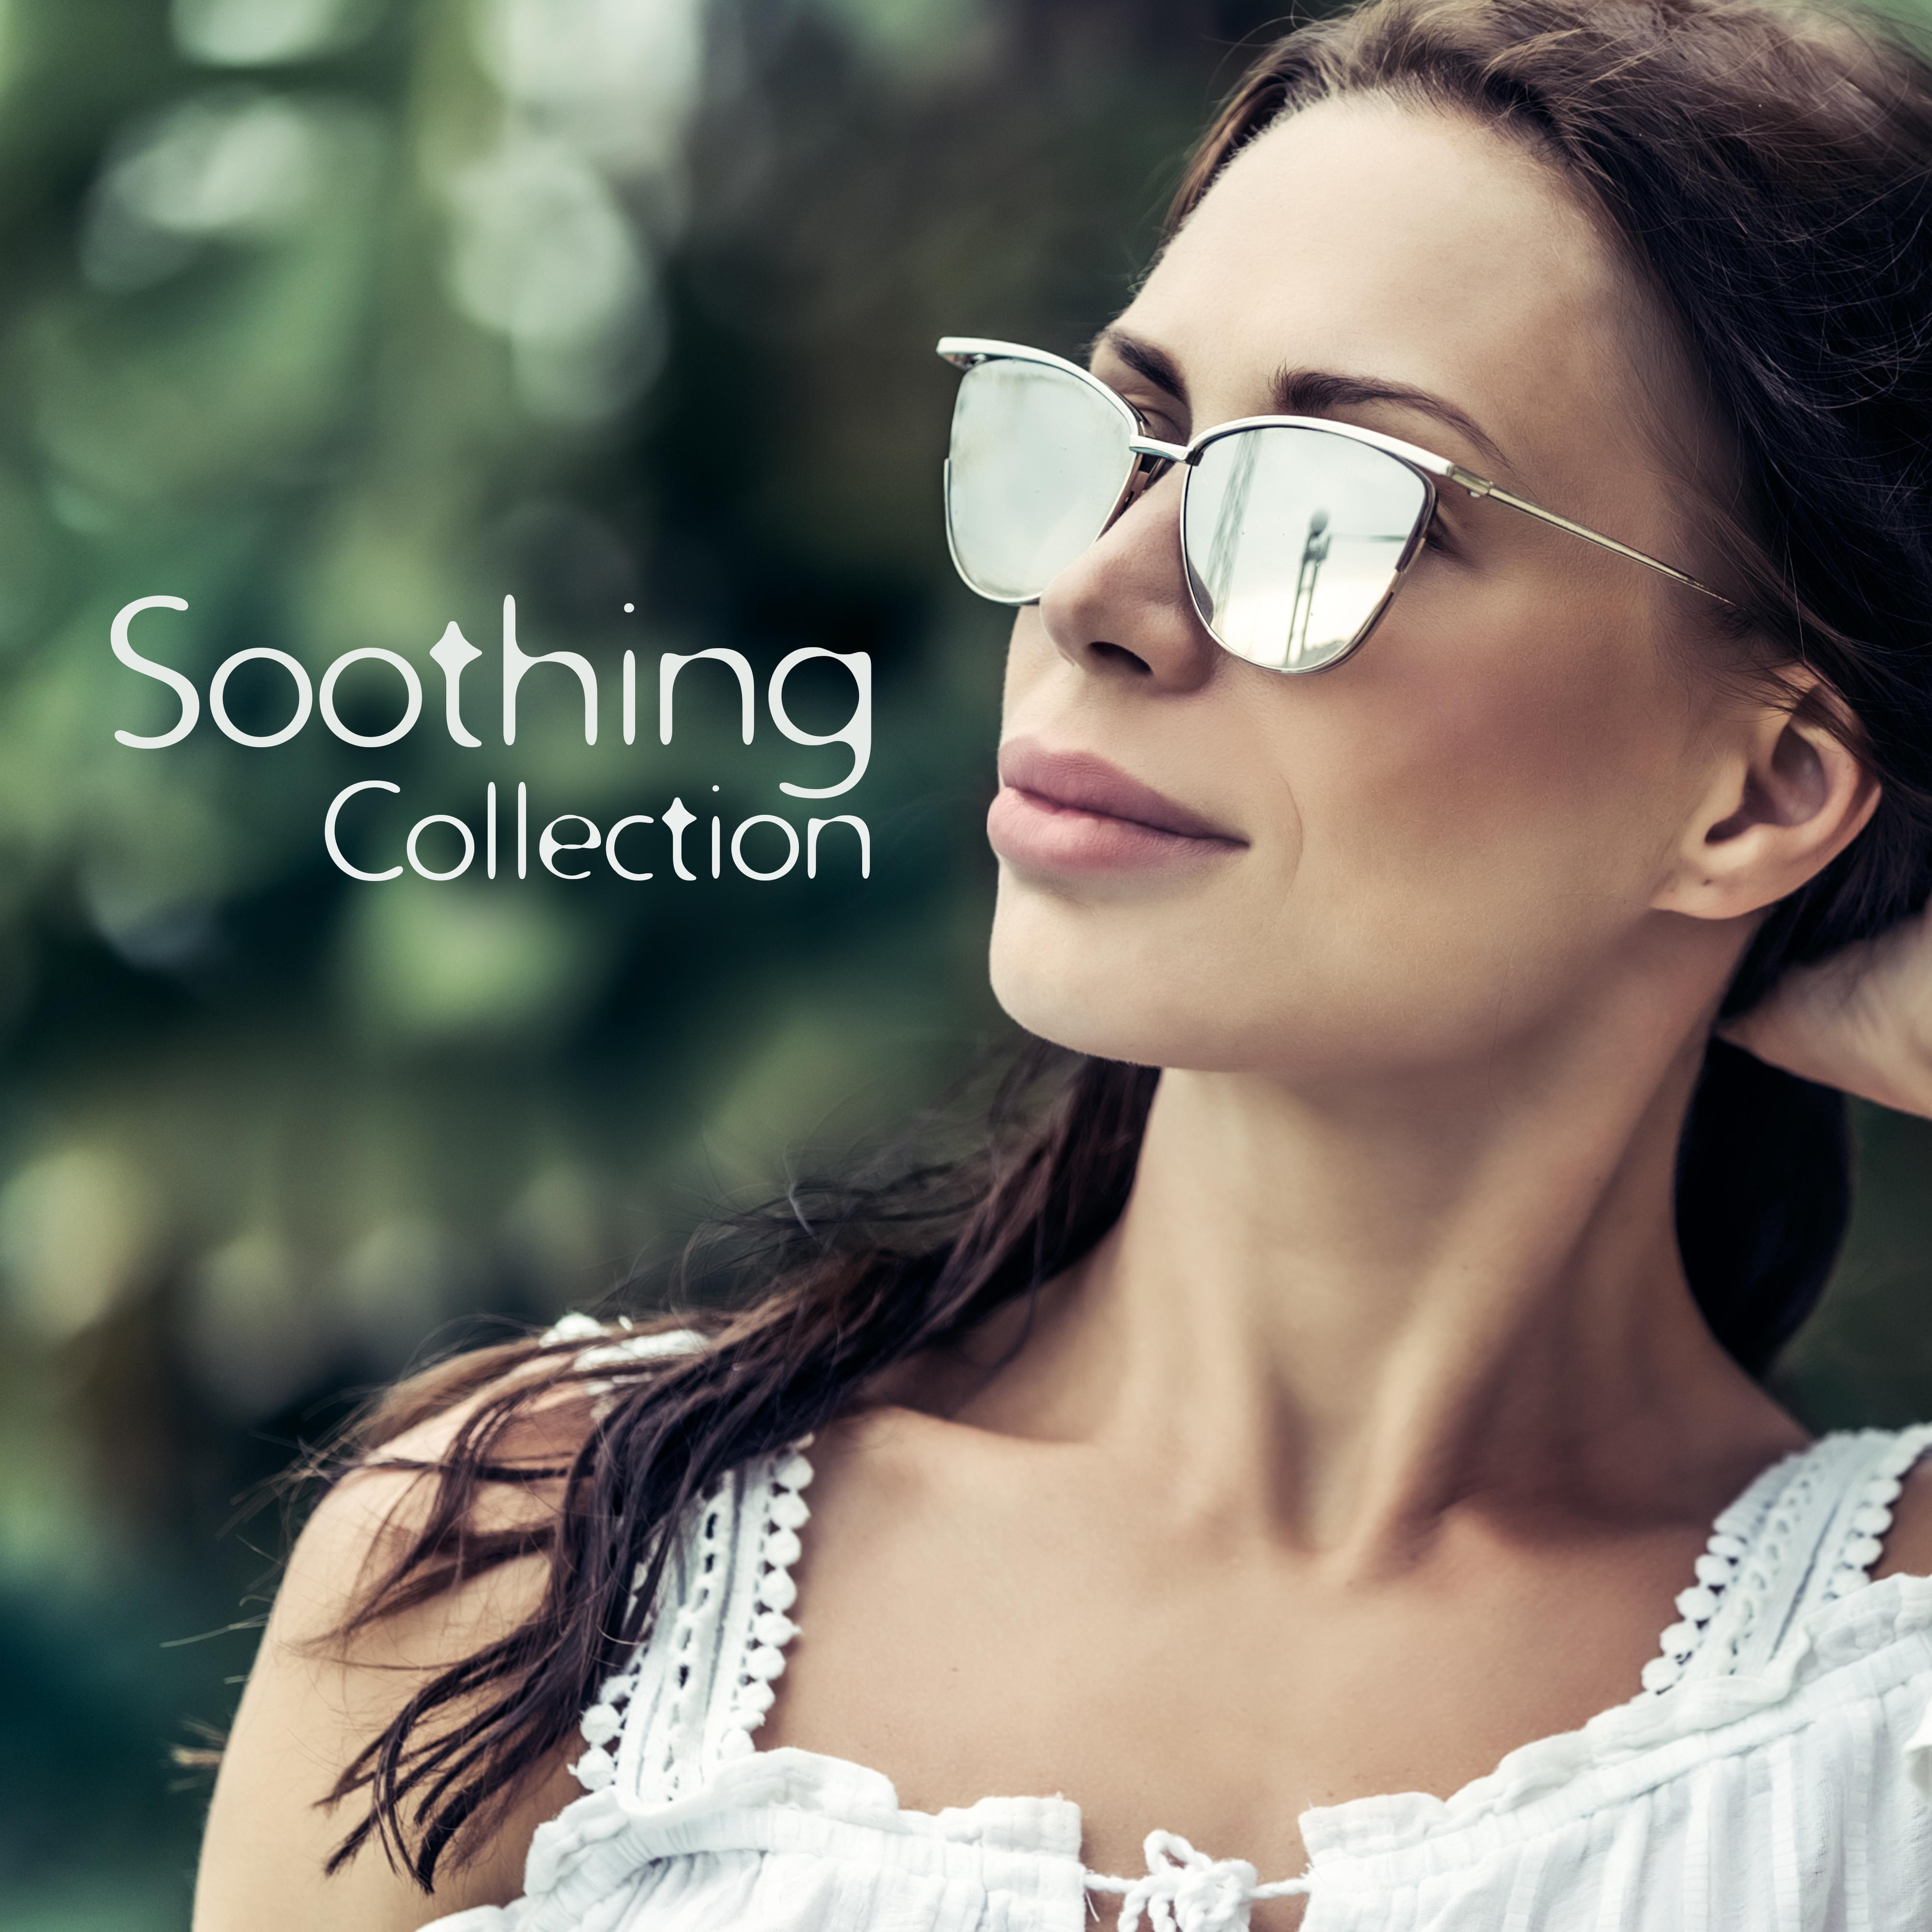 Soothing Collection